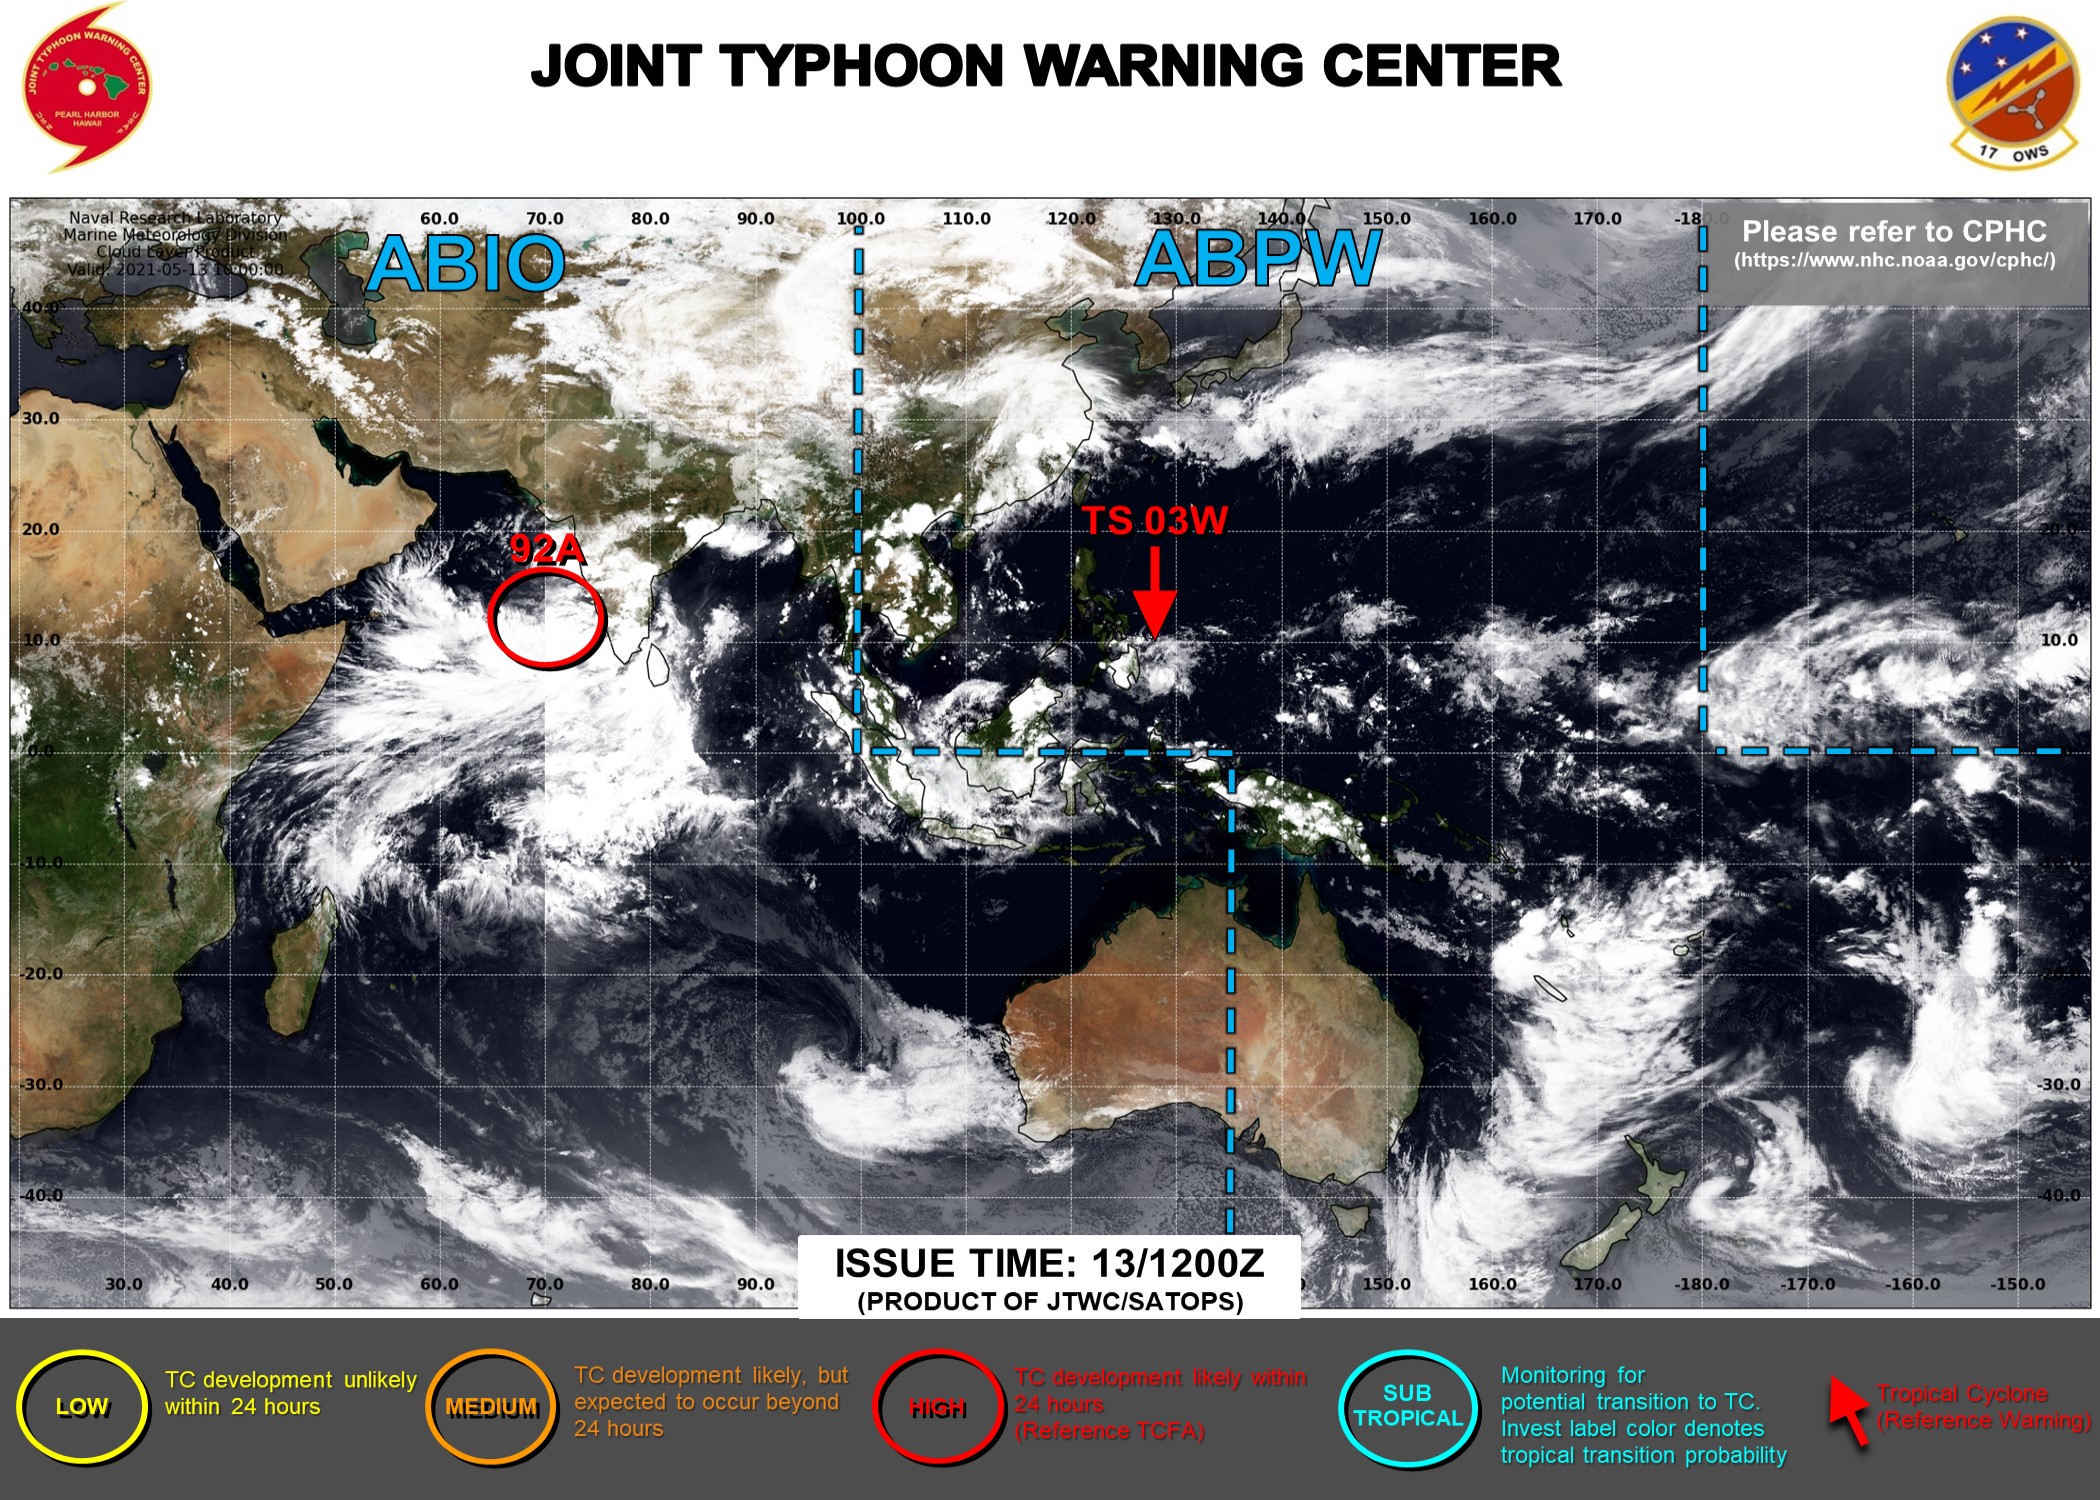 13/15UTC.JTWC IS ISSUING 6HOURLY WARNINGS AND 3HOURLY SATELLITE BULLETINS ON 03W. INVEST 92A IS UPGRADED TO HIGH: ELEVATED CHANCES OF HAVING 35KNOT WINDS NEAR ITS CENTER WITHIN 24HOURS. 3HOURLY SATELLITE BULLETINS ARE NOW ISSUED FOR 92A.